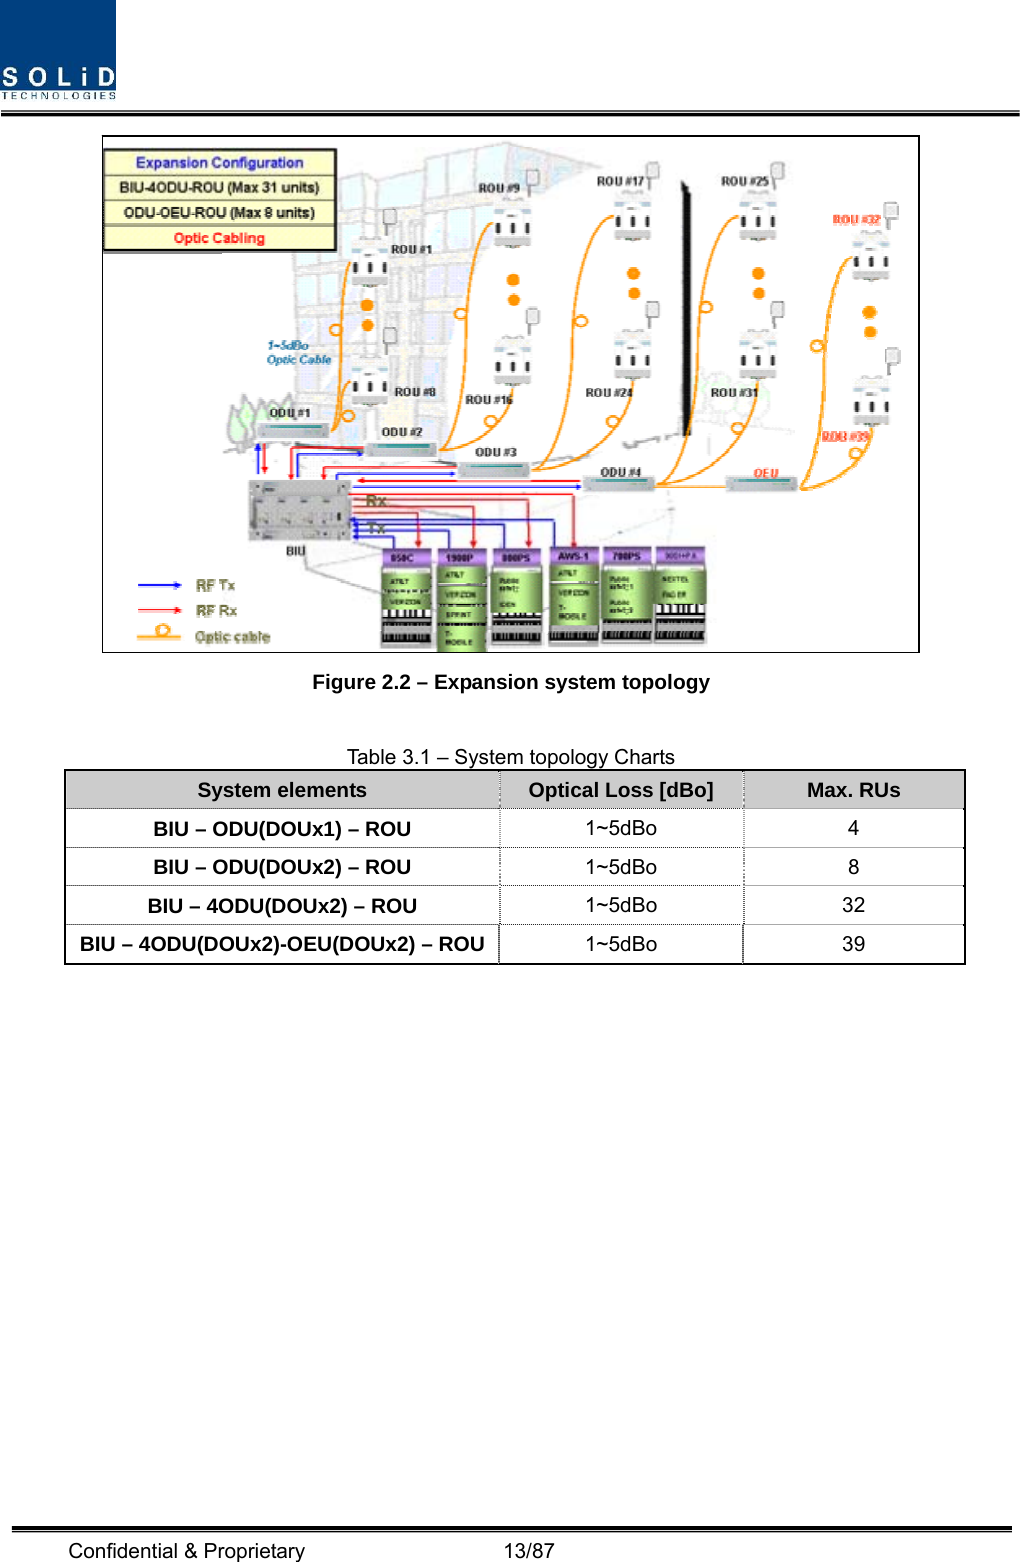  Confidential &amp; Proprietary                   13/87  Figure 2.2 – Expansion system topology    Table 3.1 – System topology Charts System elements  Optical Loss [dBo]  Max. RUs BIU – ODU(DOUx1) – ROU    1~5dBo 4 BIU – ODU(DOUx2) – ROU  1~5dBo 8 BIU – 4ODU(DOUx2) – ROU  1~5dBo 32 BIU – 4ODU(DOUx2)-OEU(DOUx2) – ROU 1~5dBo 39              